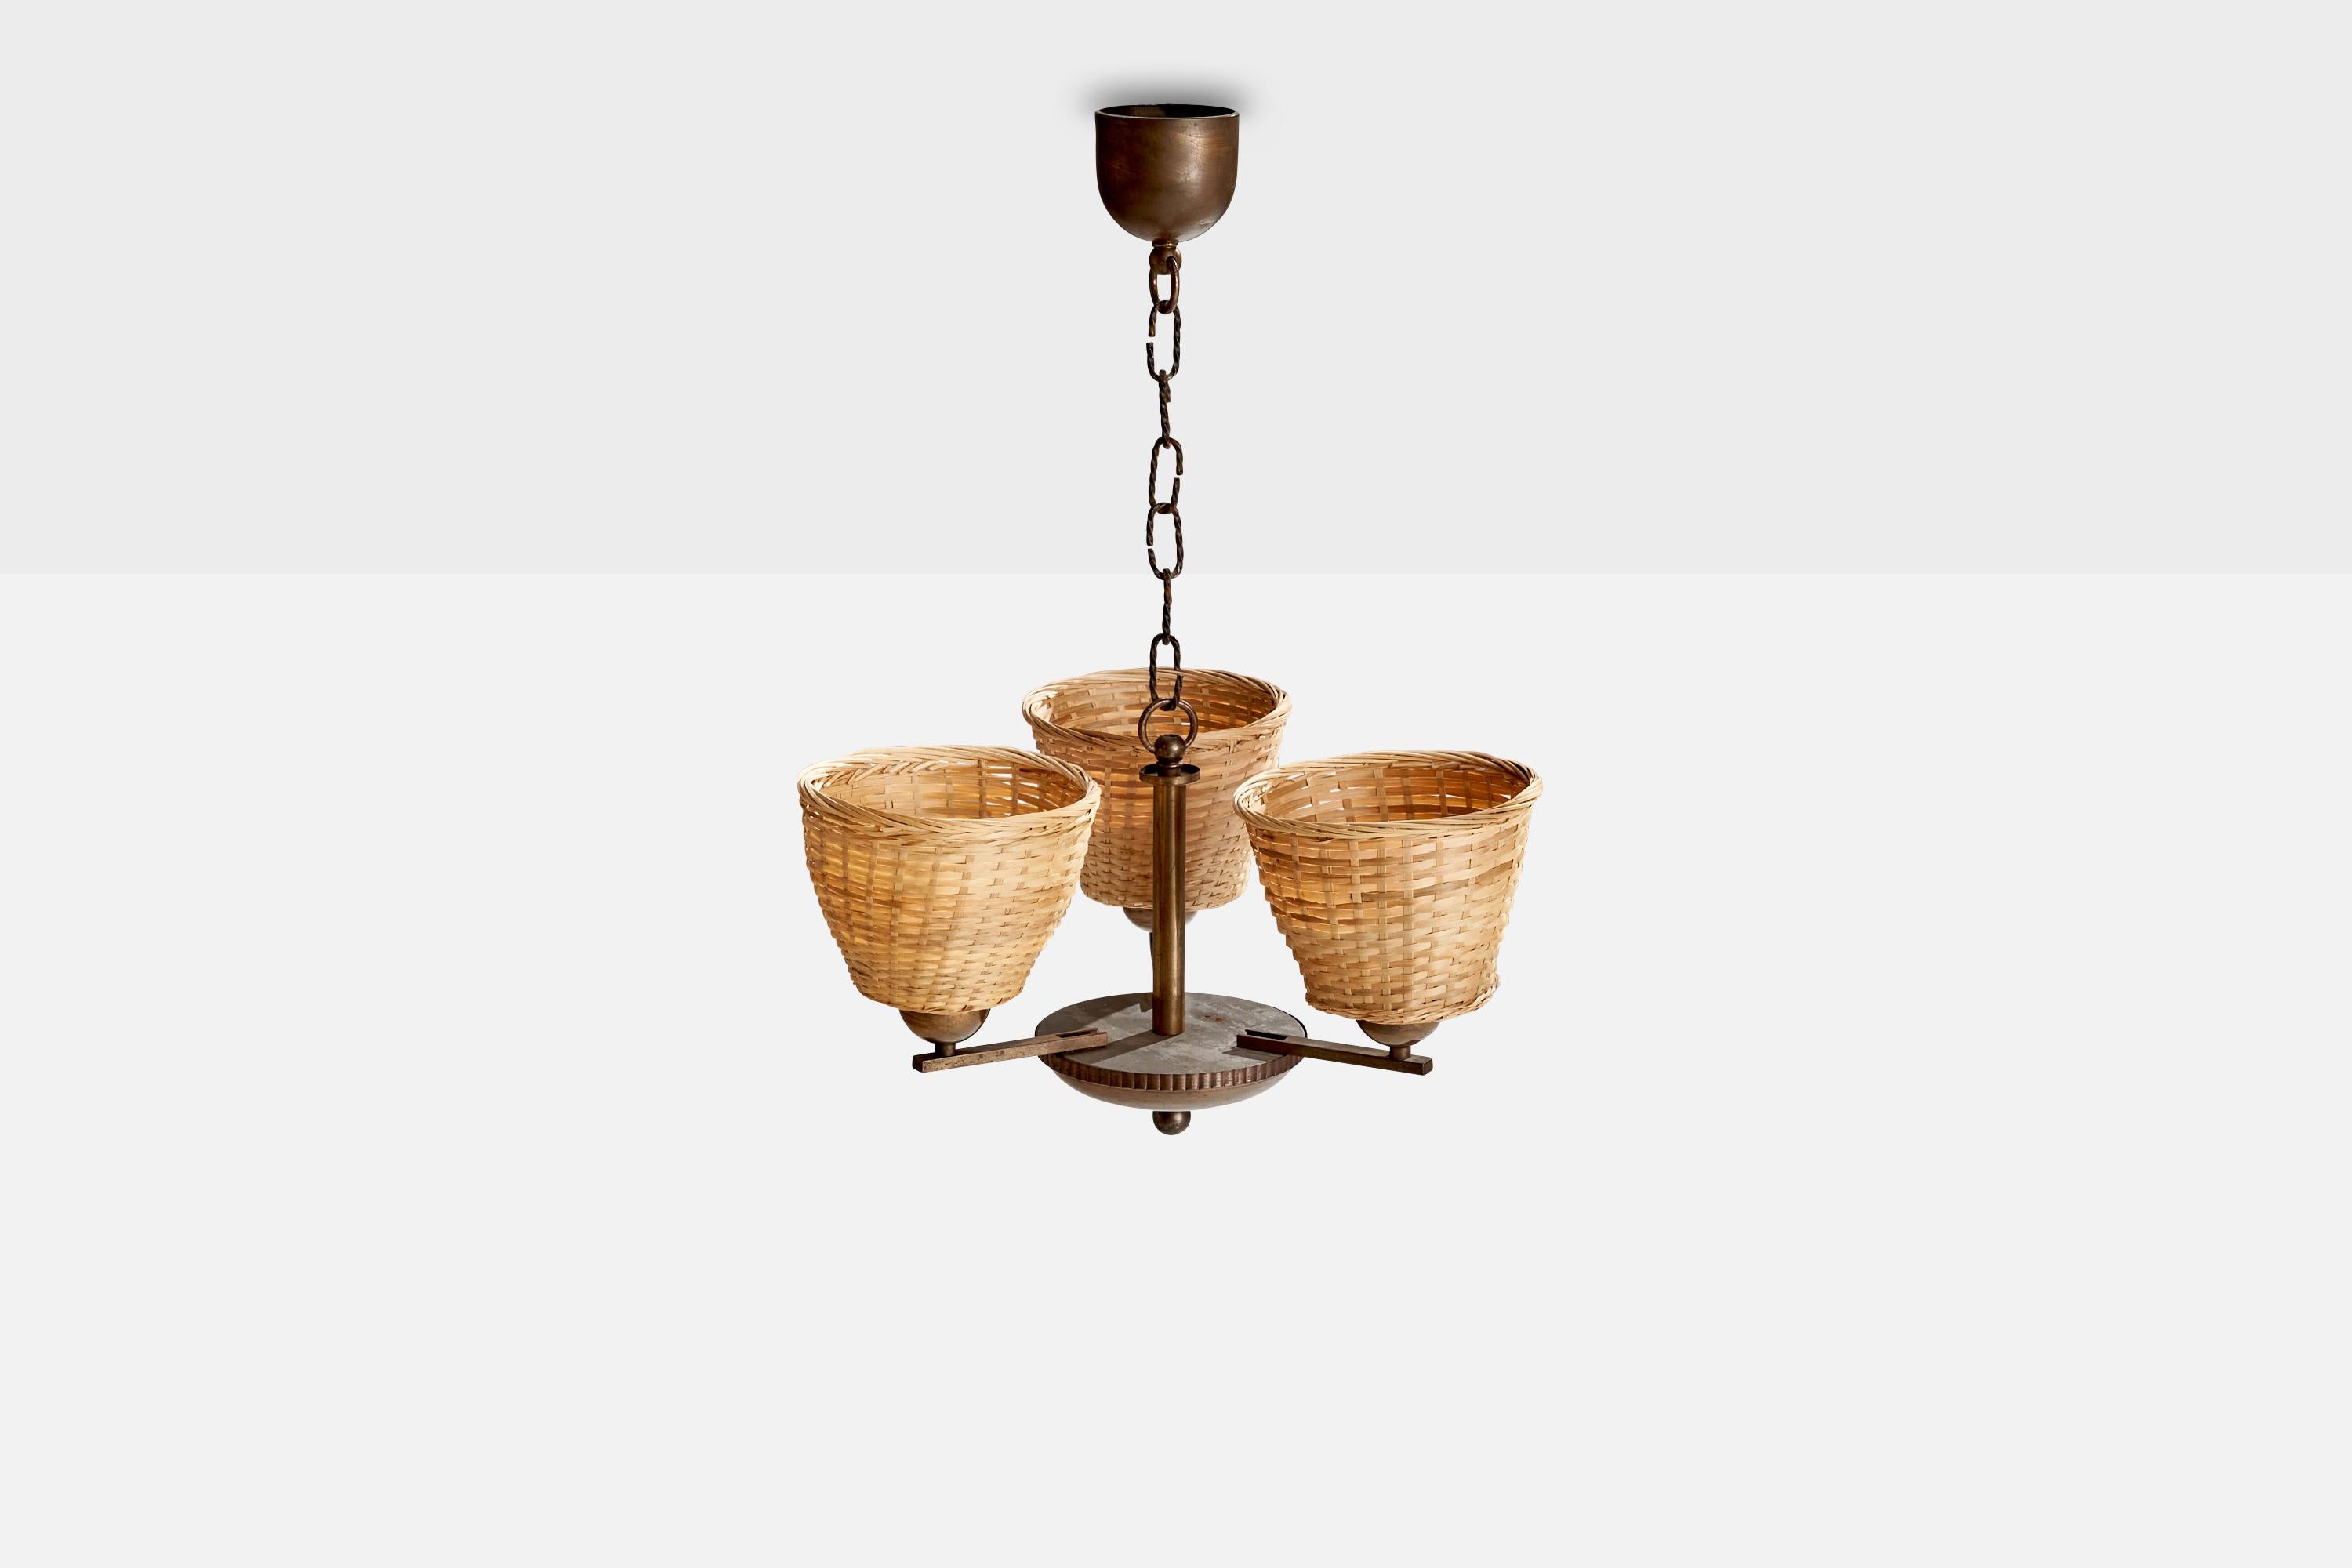 Finnish Paavo Tynell, Chandelier, Brass, Rattan, Finland, 1930s For Sale